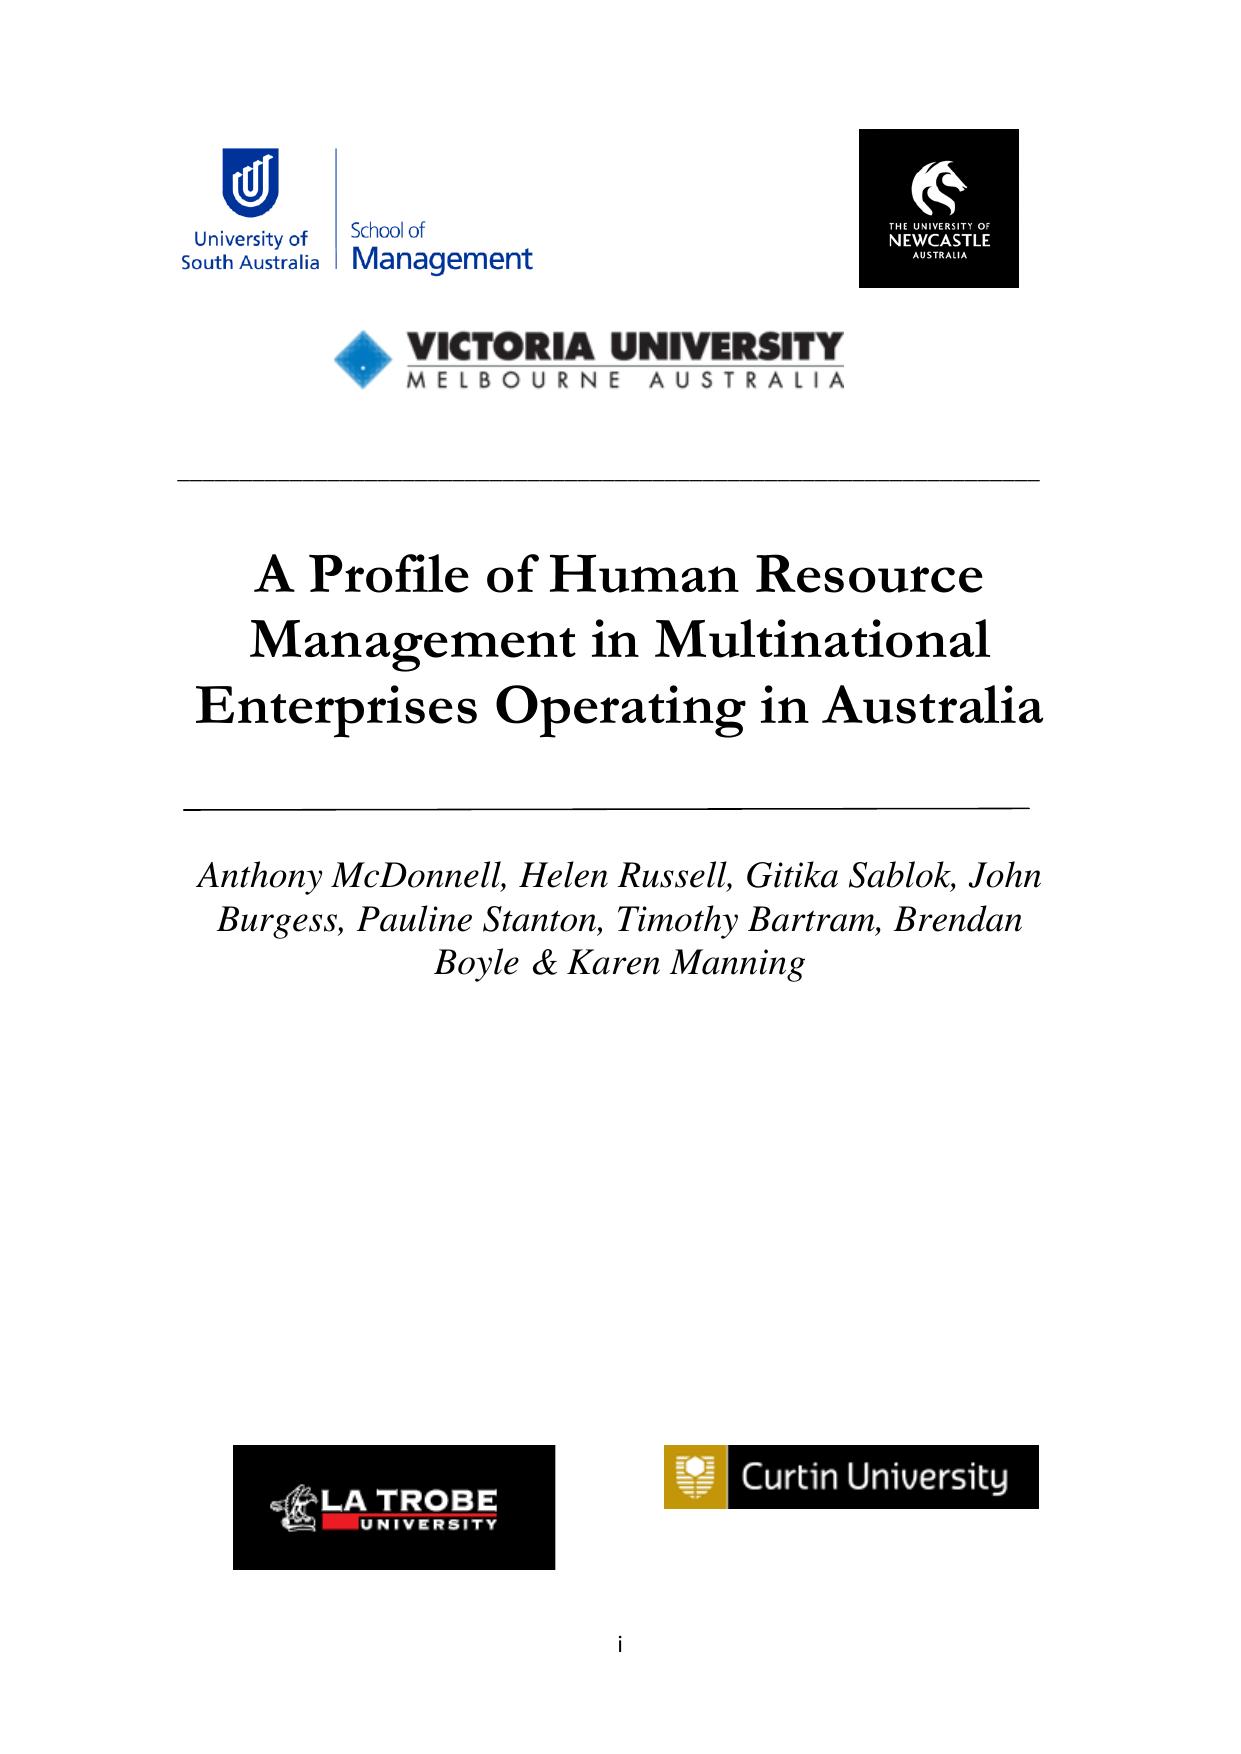 A Profile of Human Resource management in multinational enterprises operating in Australia 2011